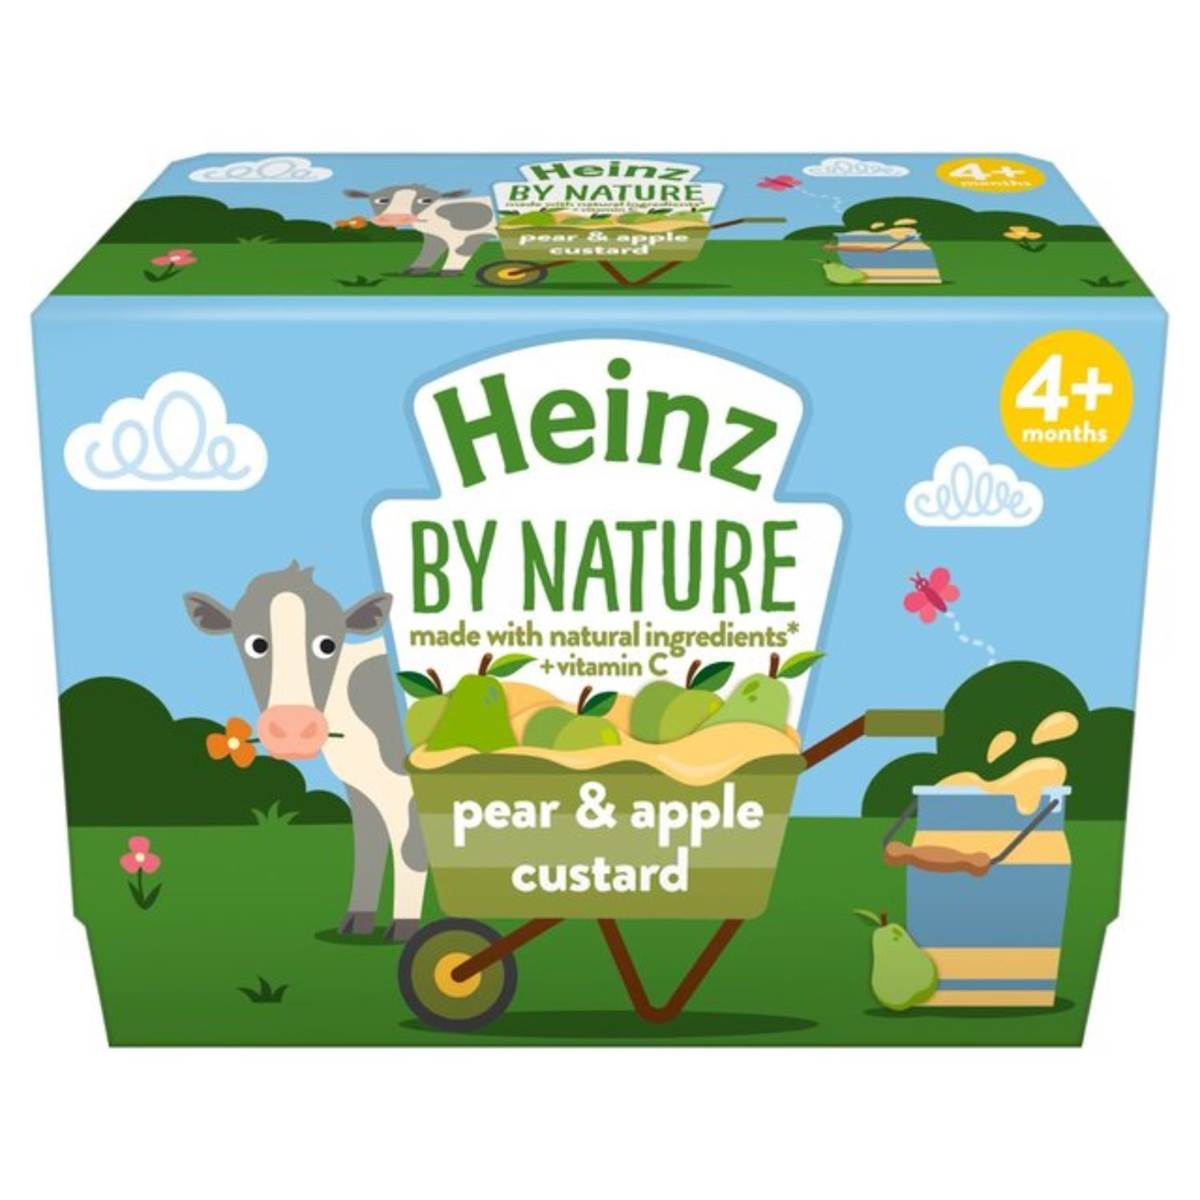 Heinz by Nature Pear & Apple Custrad (4 pack) - 400g (4x100g)